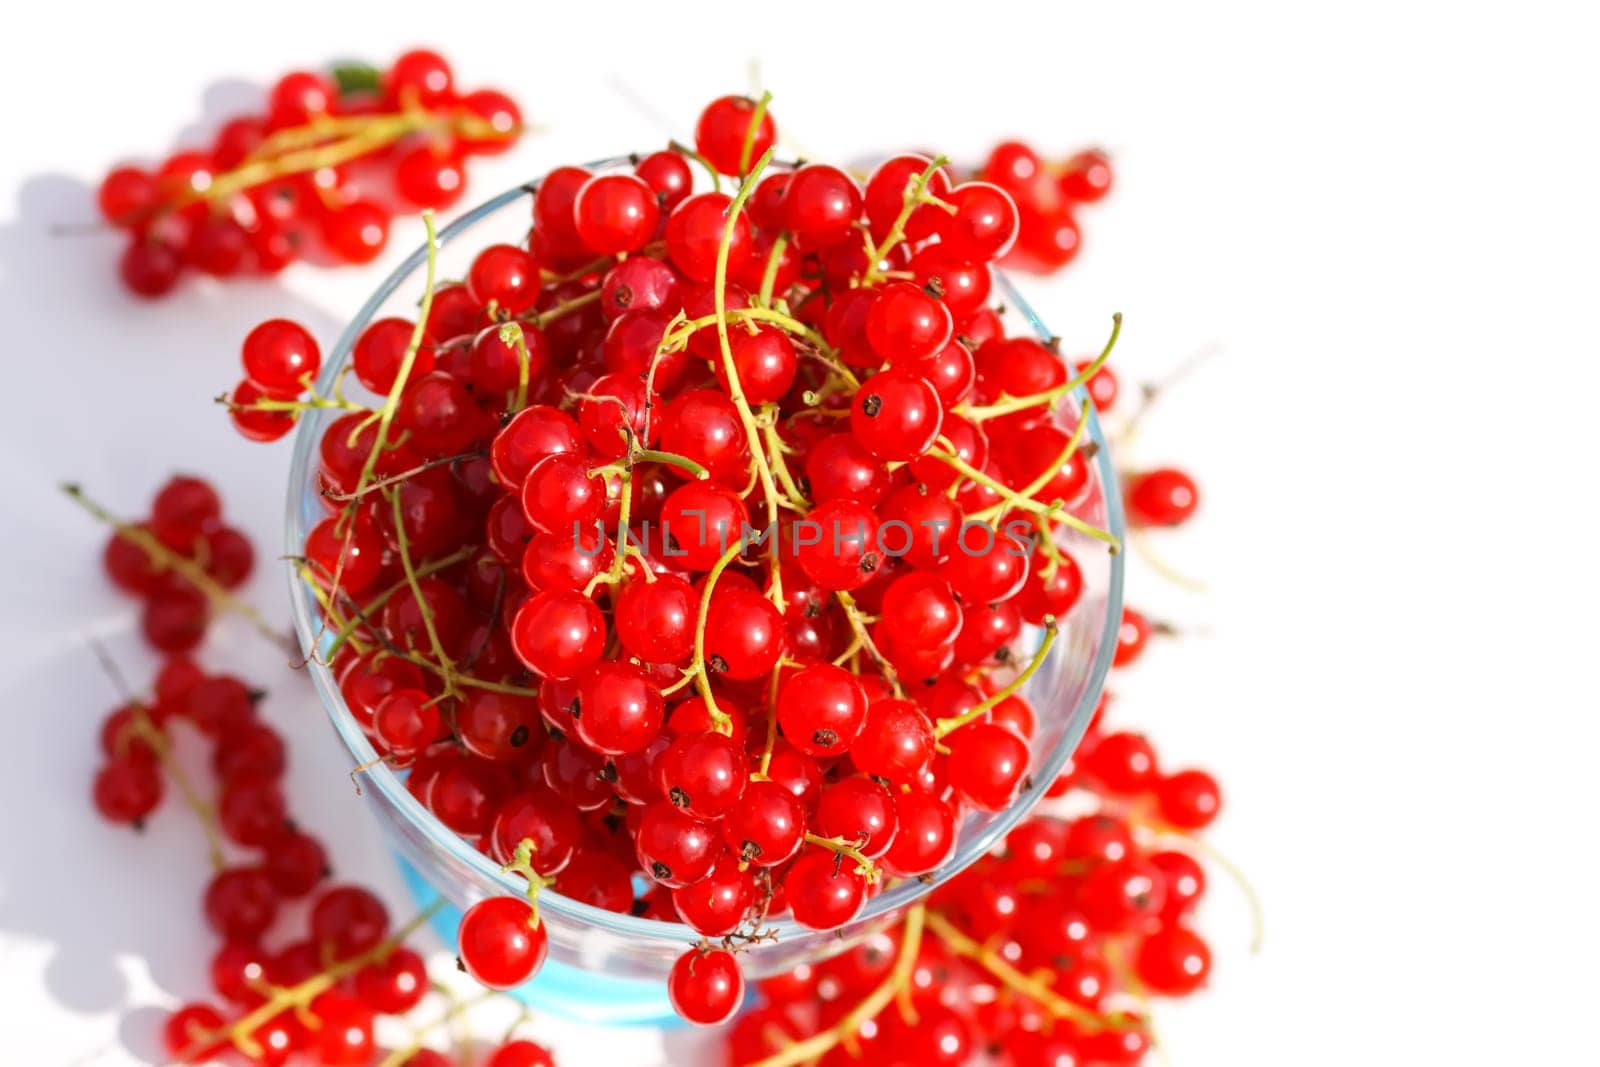 Ripe red currant berries in a transparent cup. Healthy food ingredients.